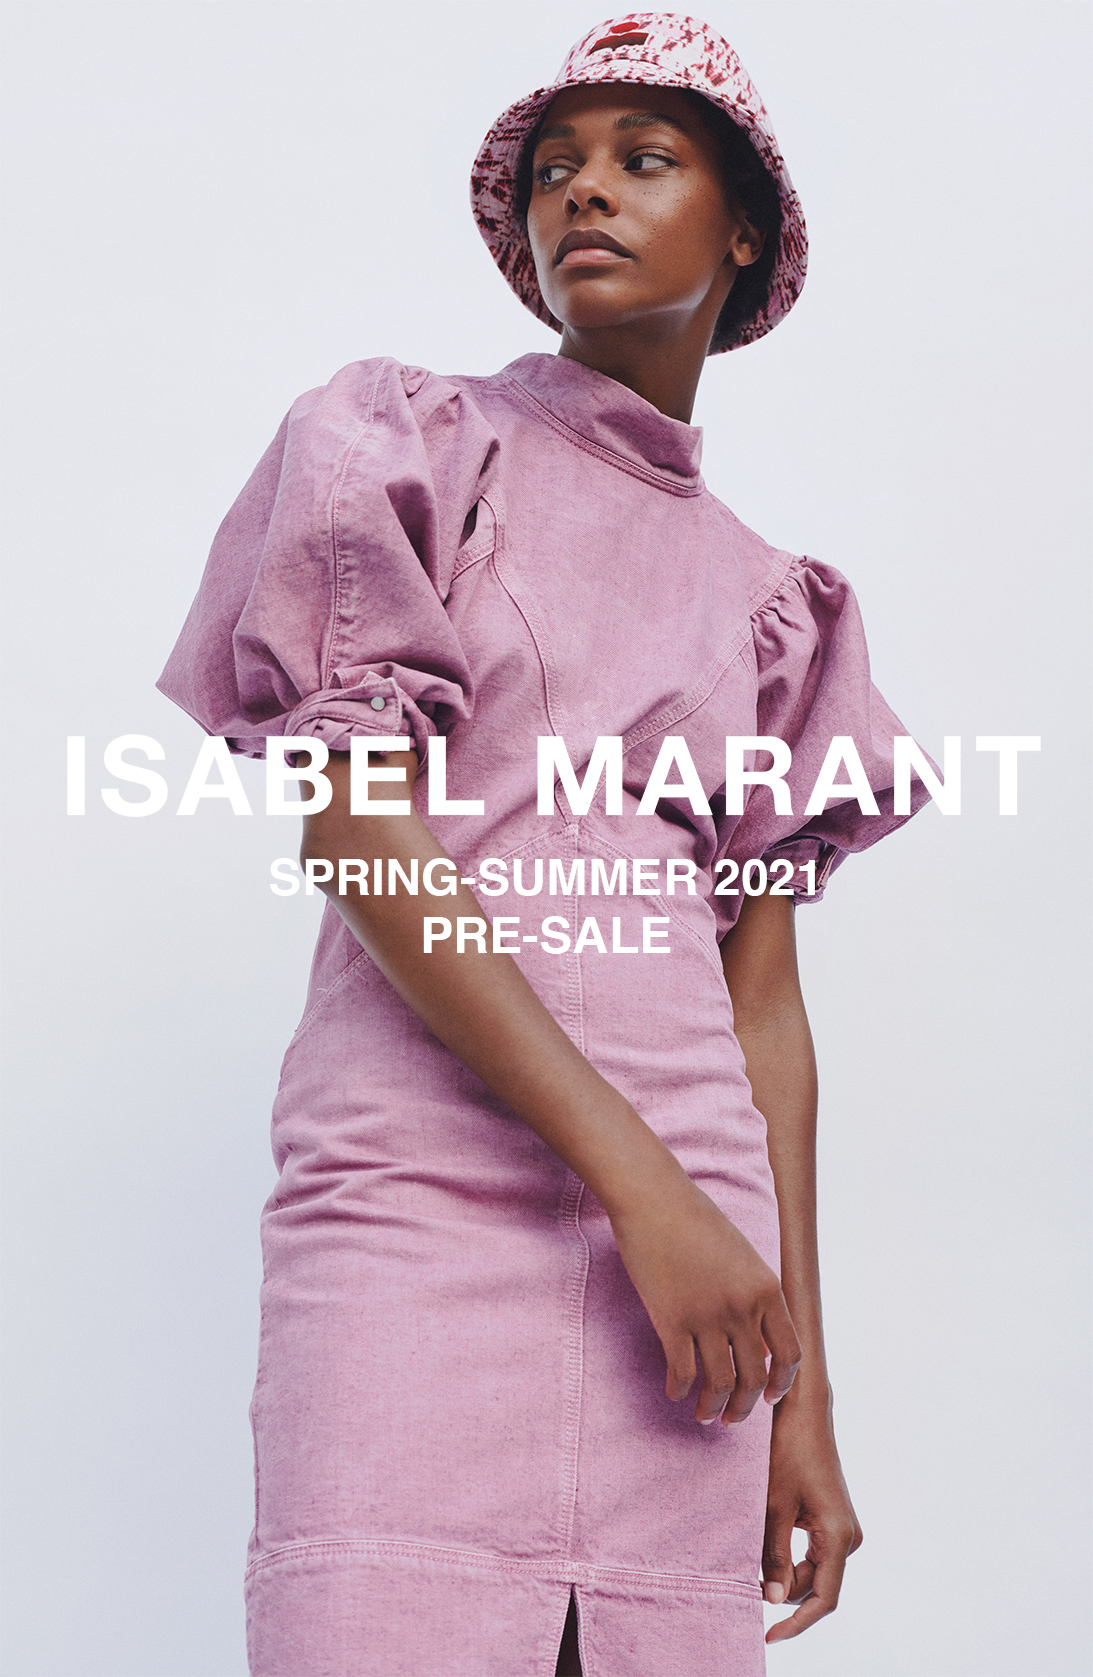 Early Access to the Isabel Marant Sale ...